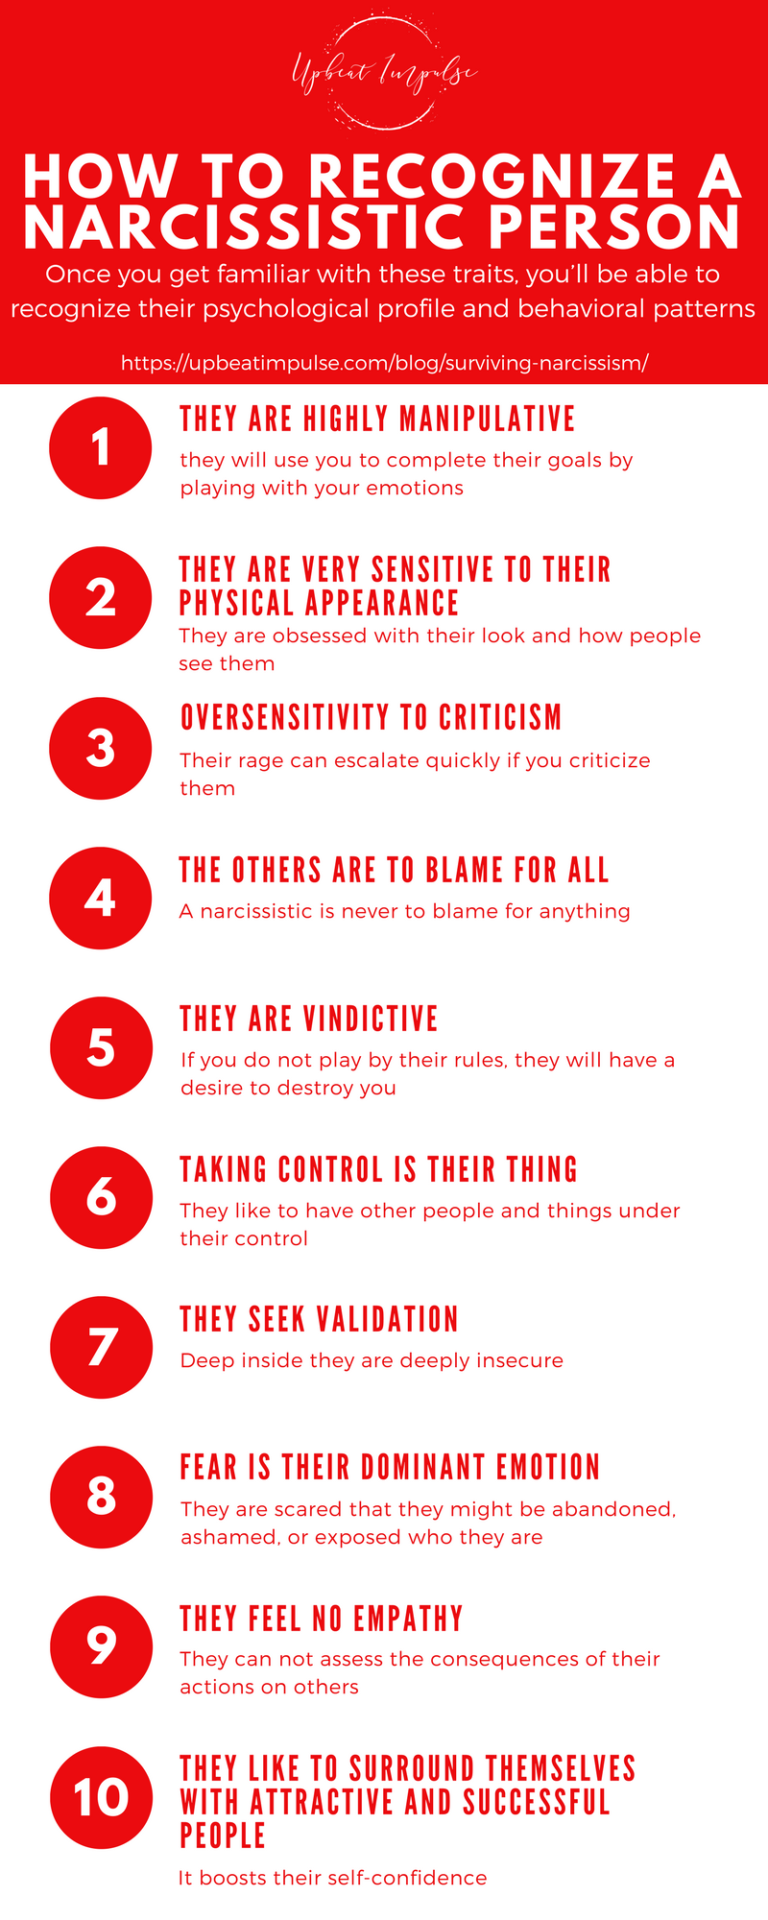 How To Recognize A Narcissistic Person 768x1920 